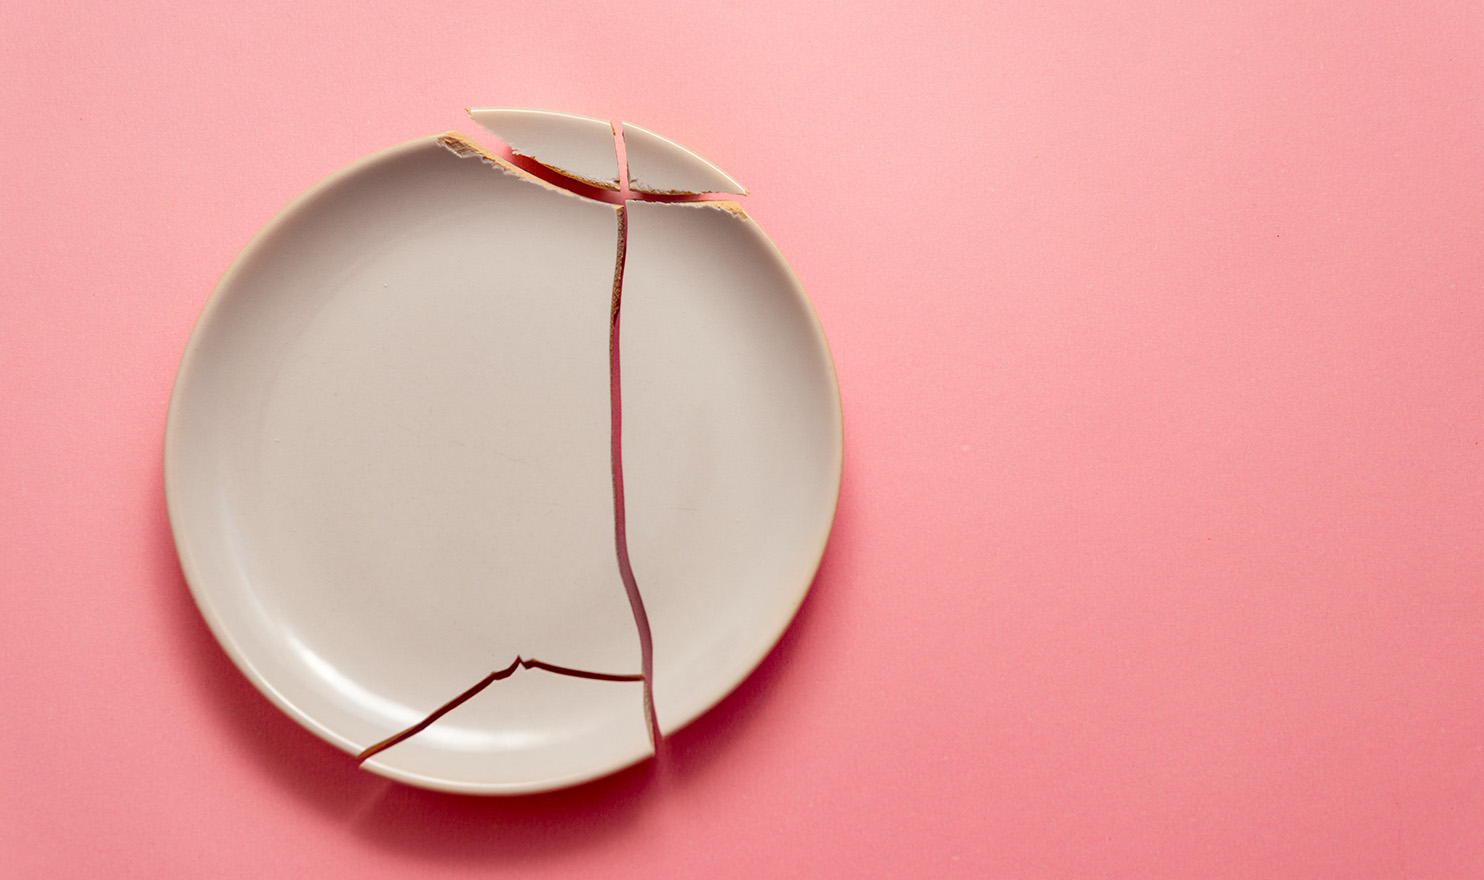 A broken clay plate on a light pink background.